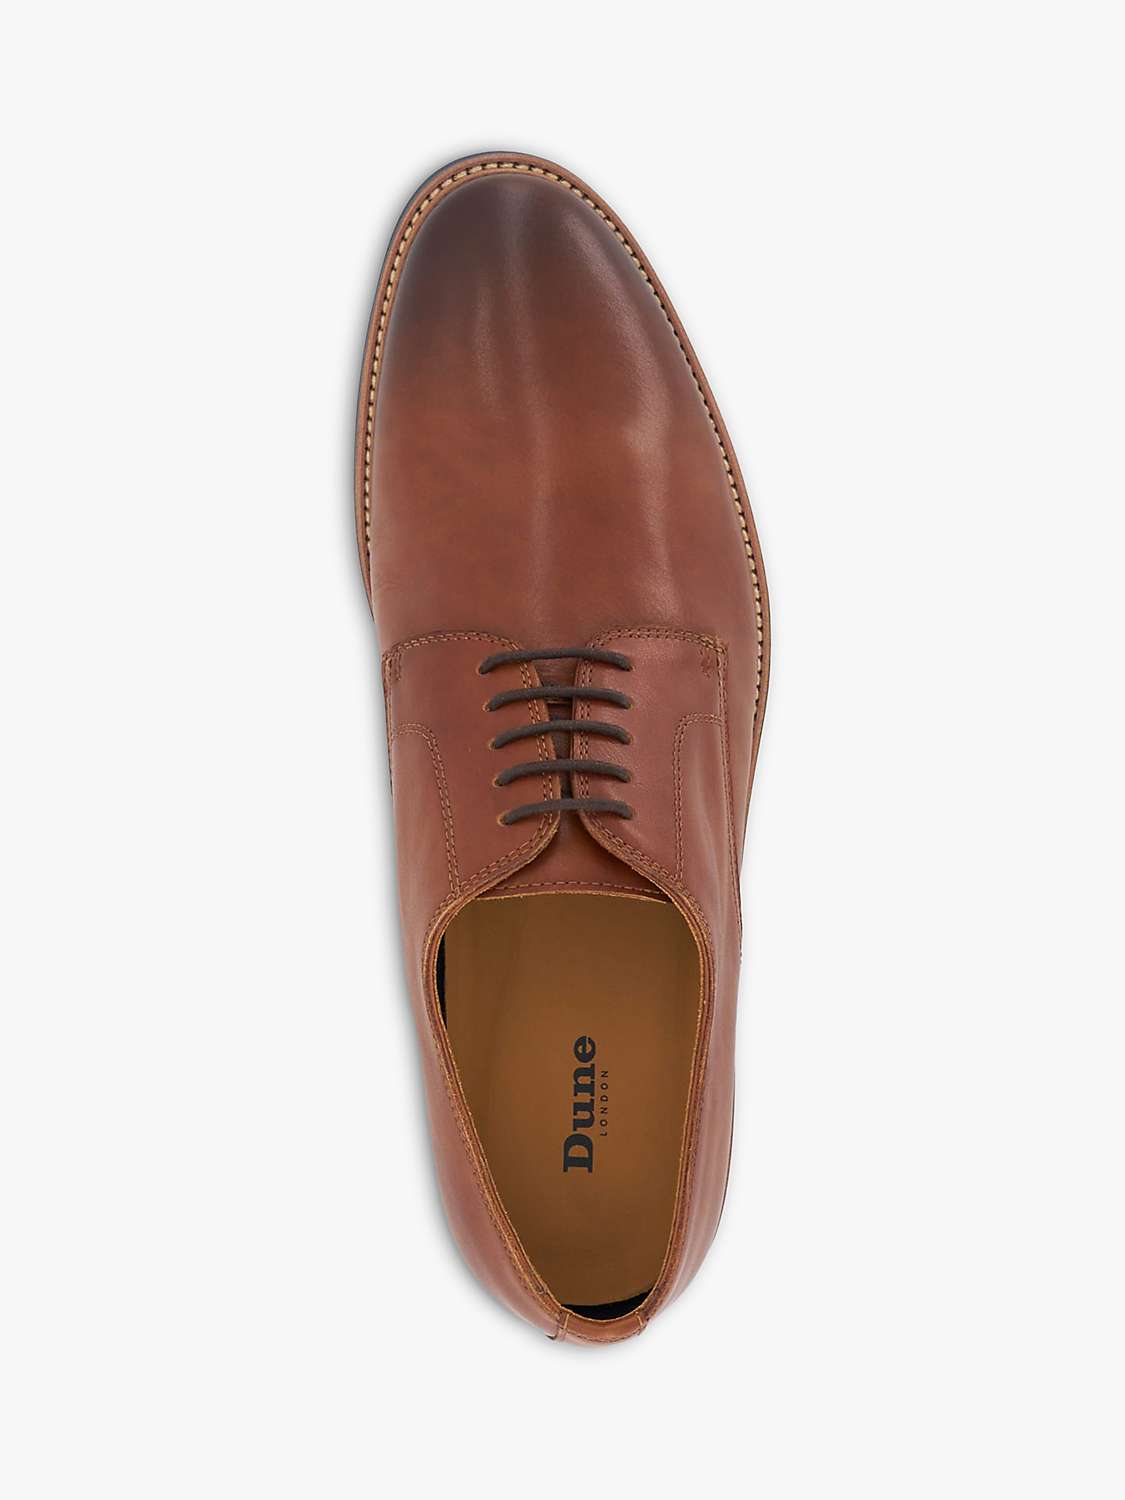 Buy Dune Stanley Leather Derby Shoes Online at johnlewis.com